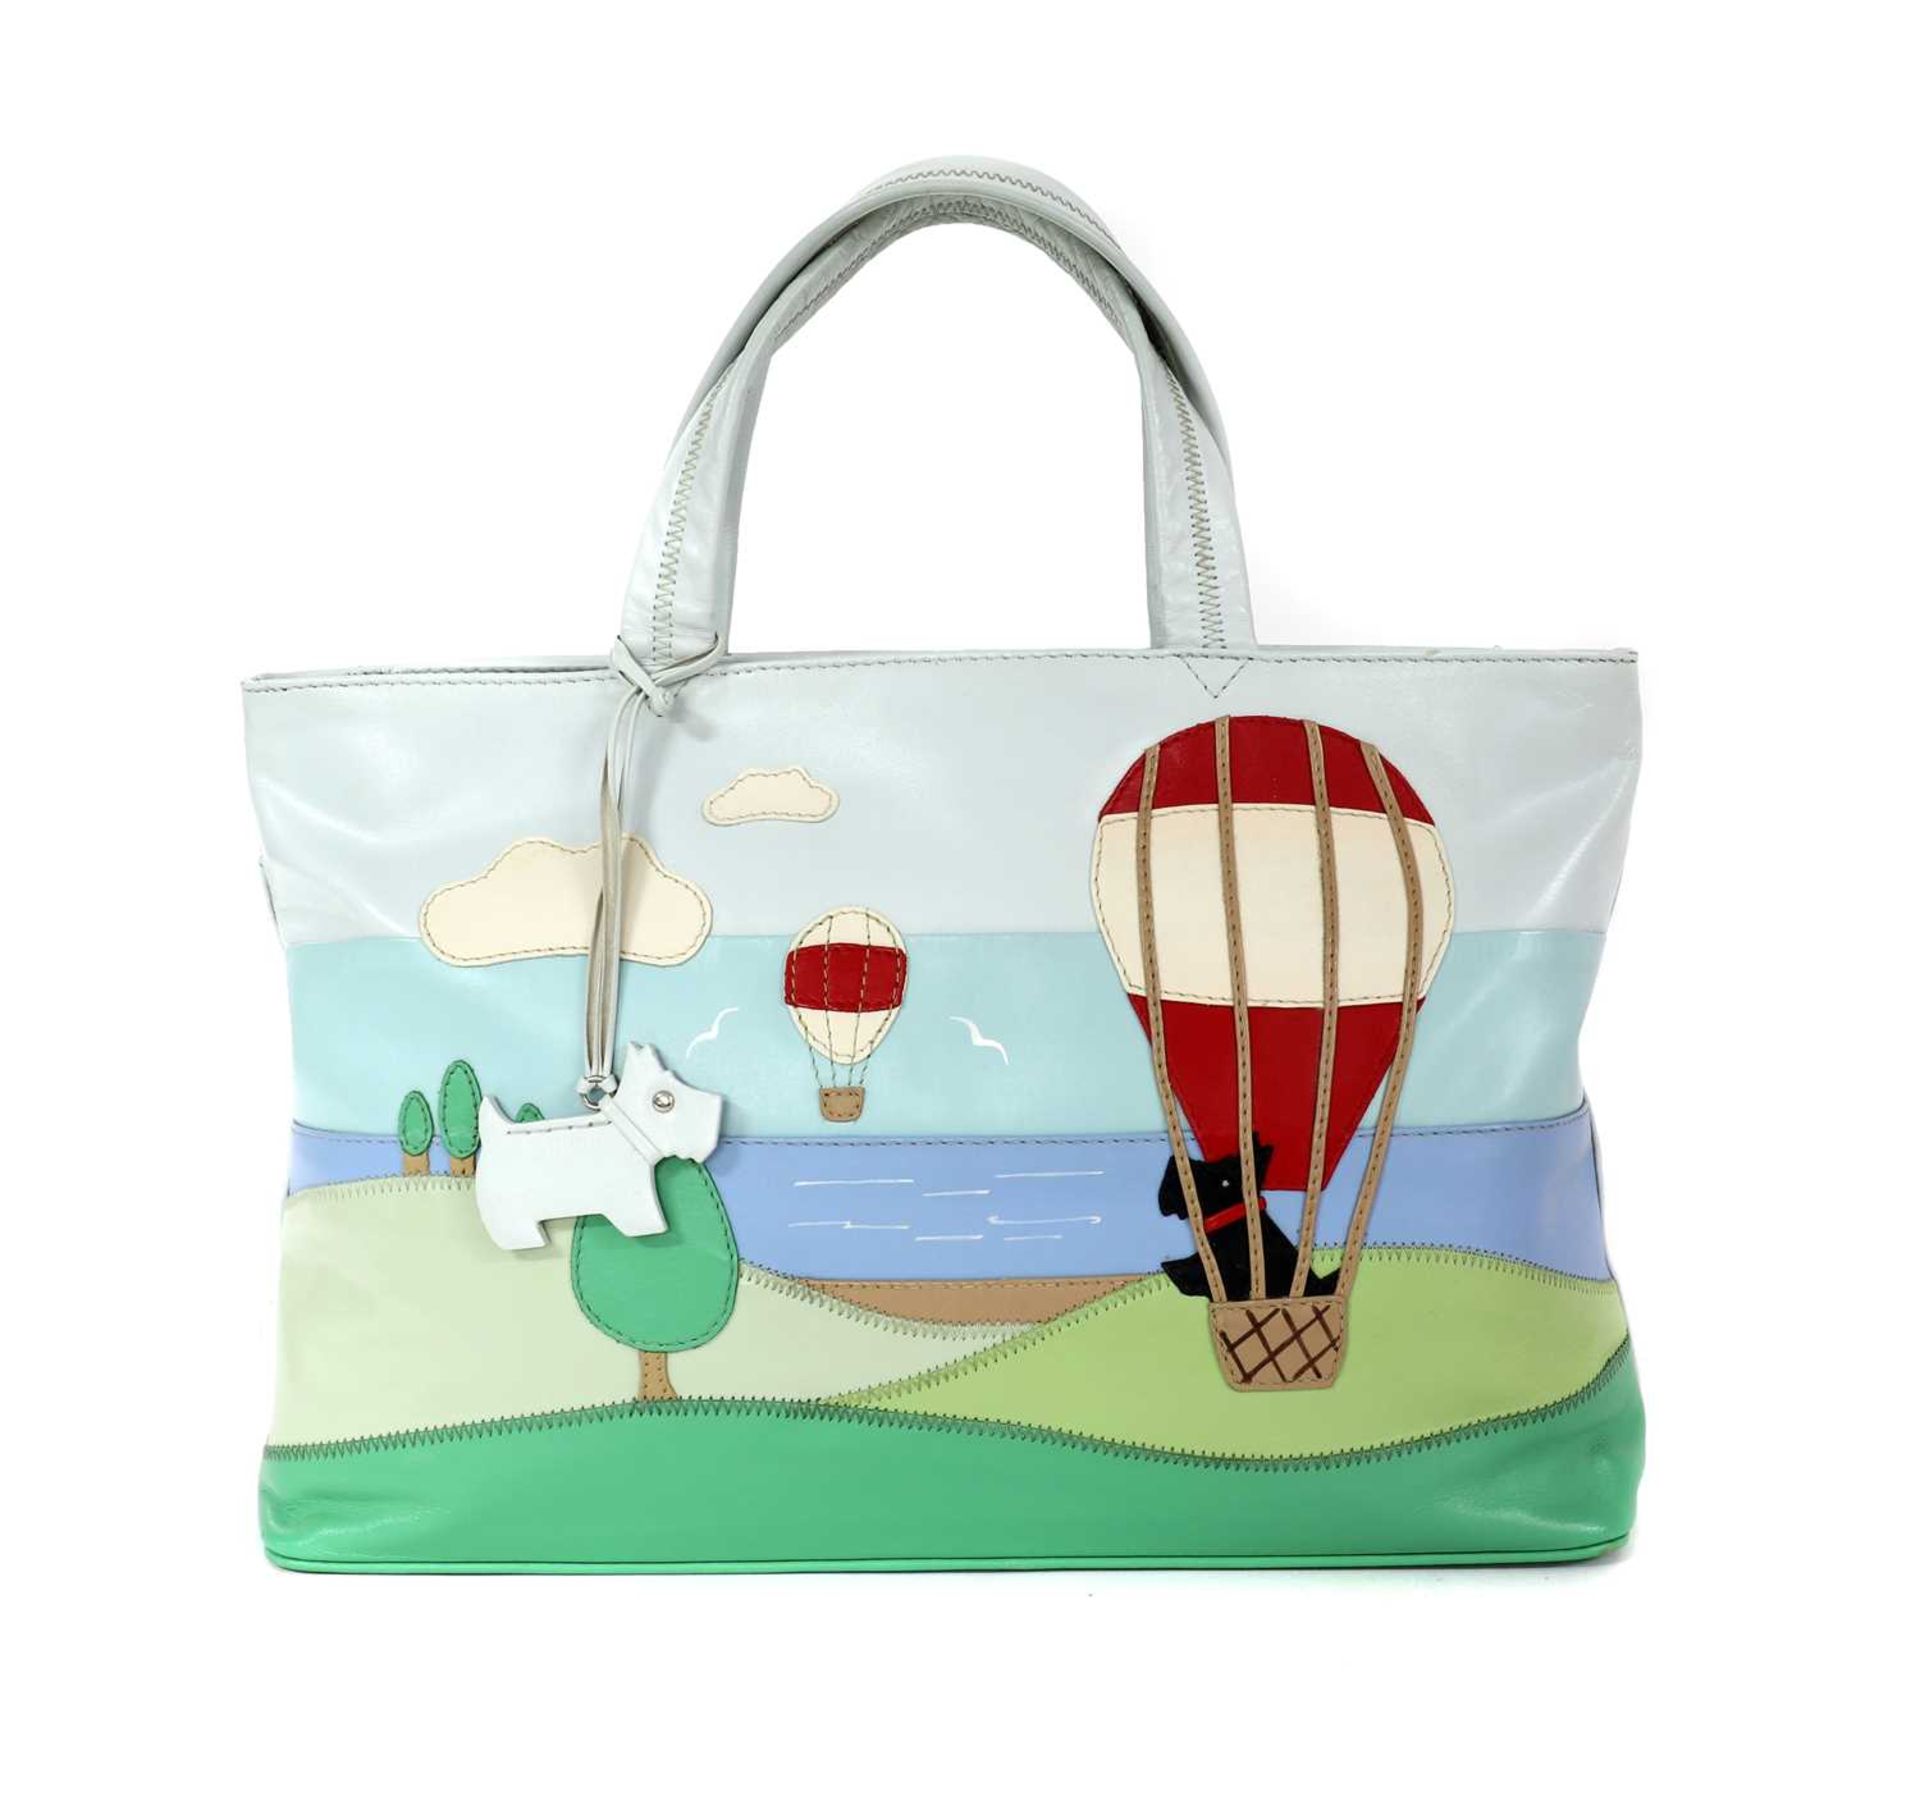 A Radley 'Up Up and Away' bag,